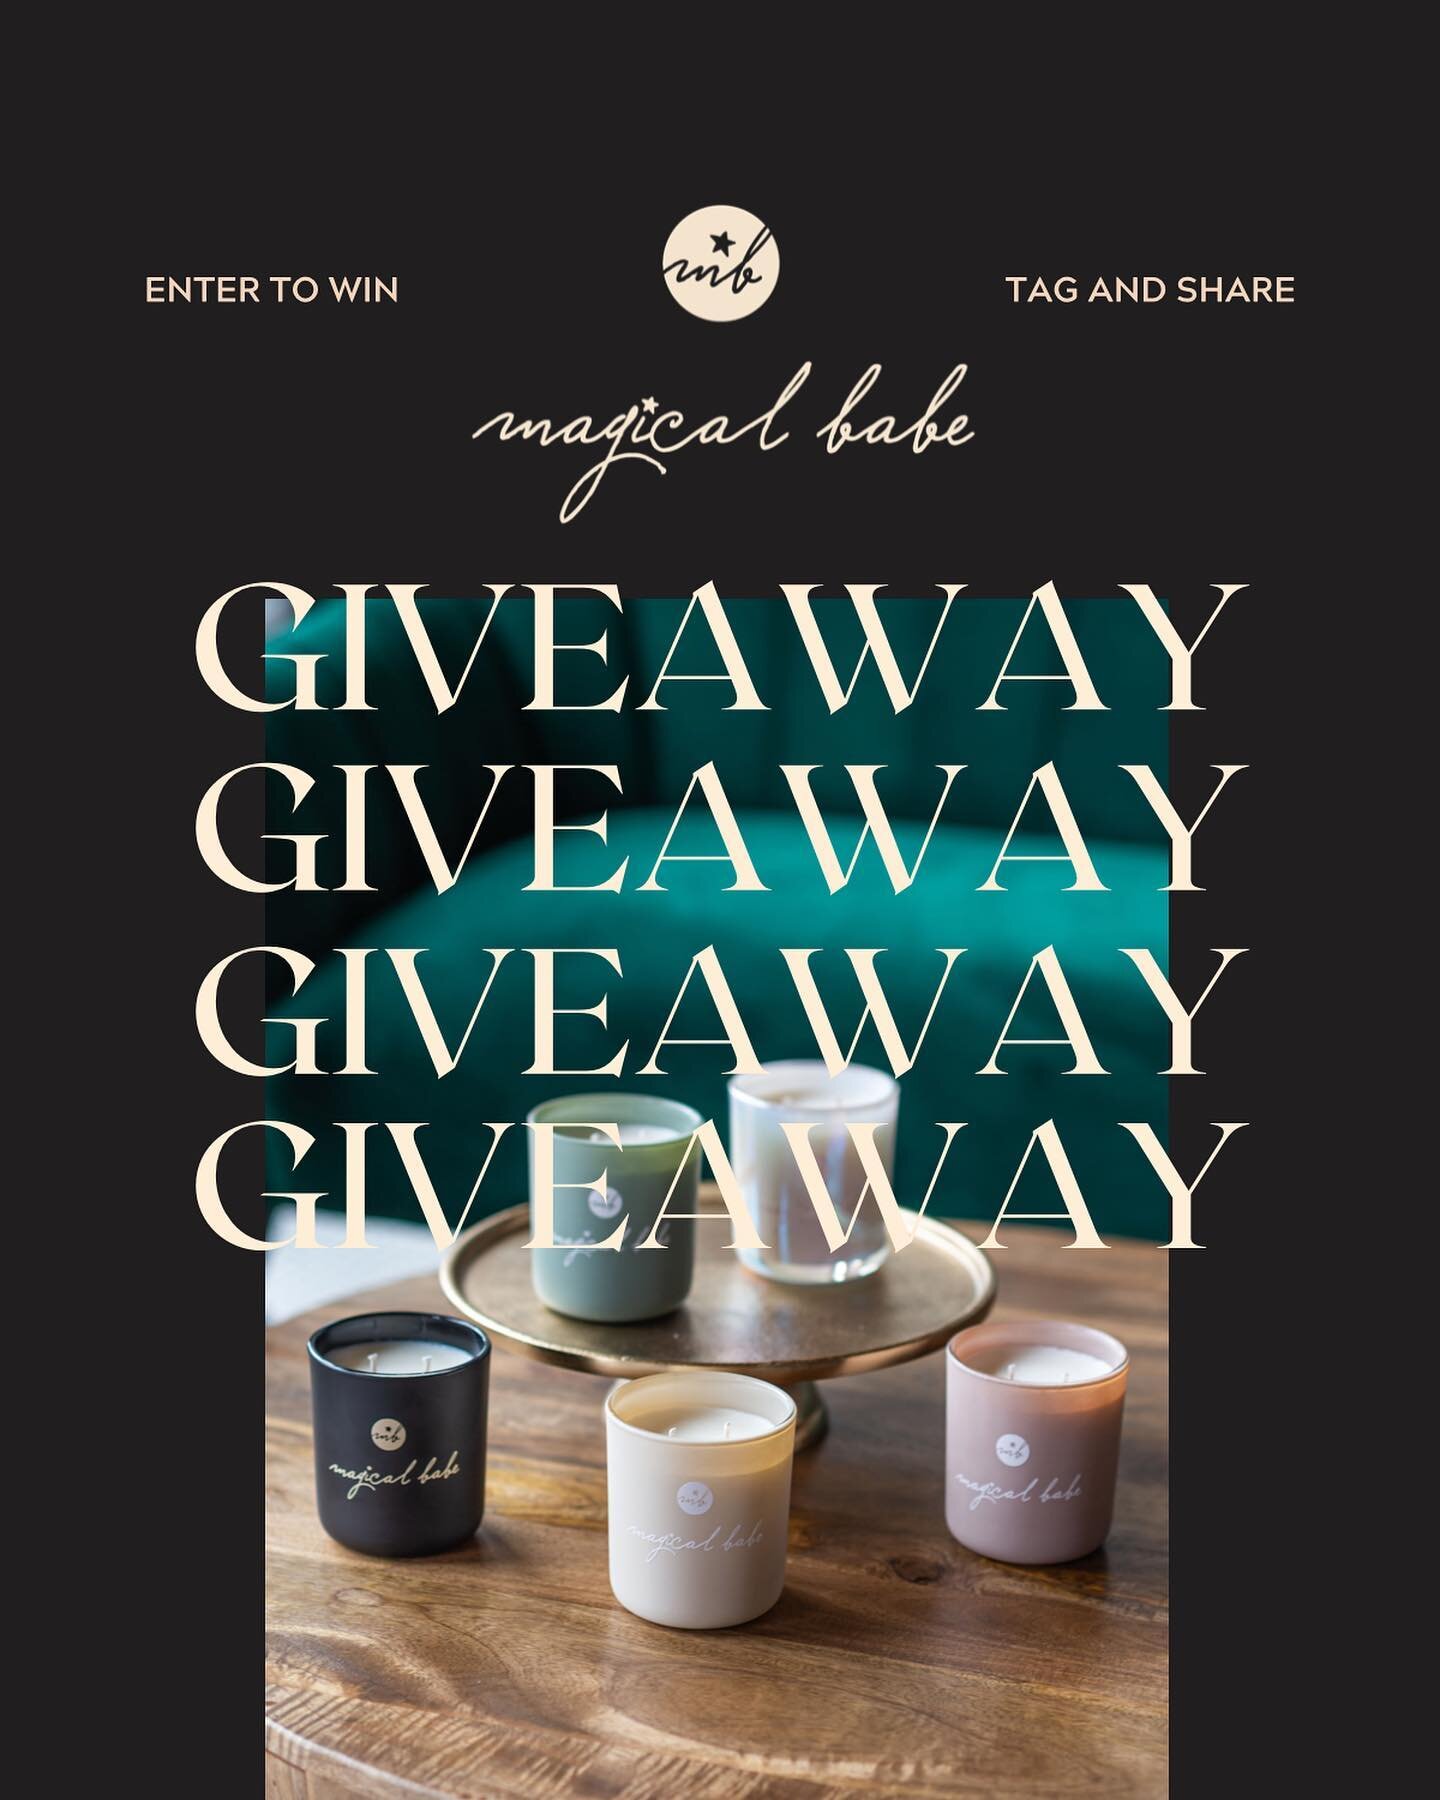 🚨 Giveaway alert 🚨 Are you excited about our launch? Looking for a practical, sensuous, and beautiful way to infuse more magic into your life?  Just effing love candles that are clean and made with intention?

Magical Babe brings you a chance to ge